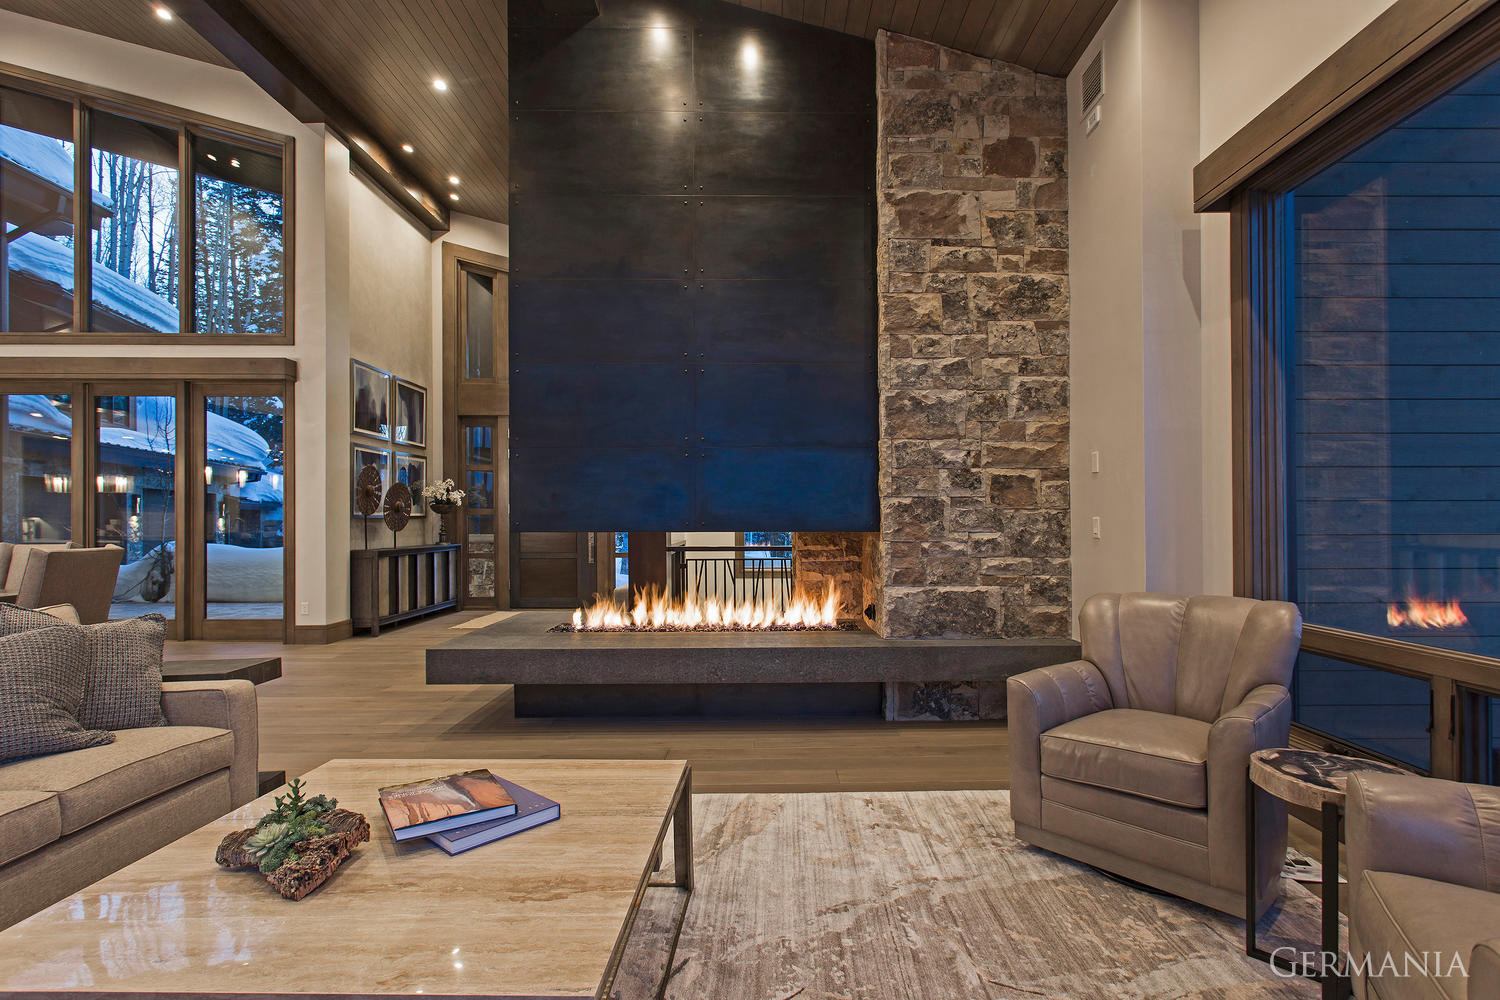 From tongue and groove ceiling to fireplaces, our superior building and design offer some of the best custom built living rooms for mountain home living.